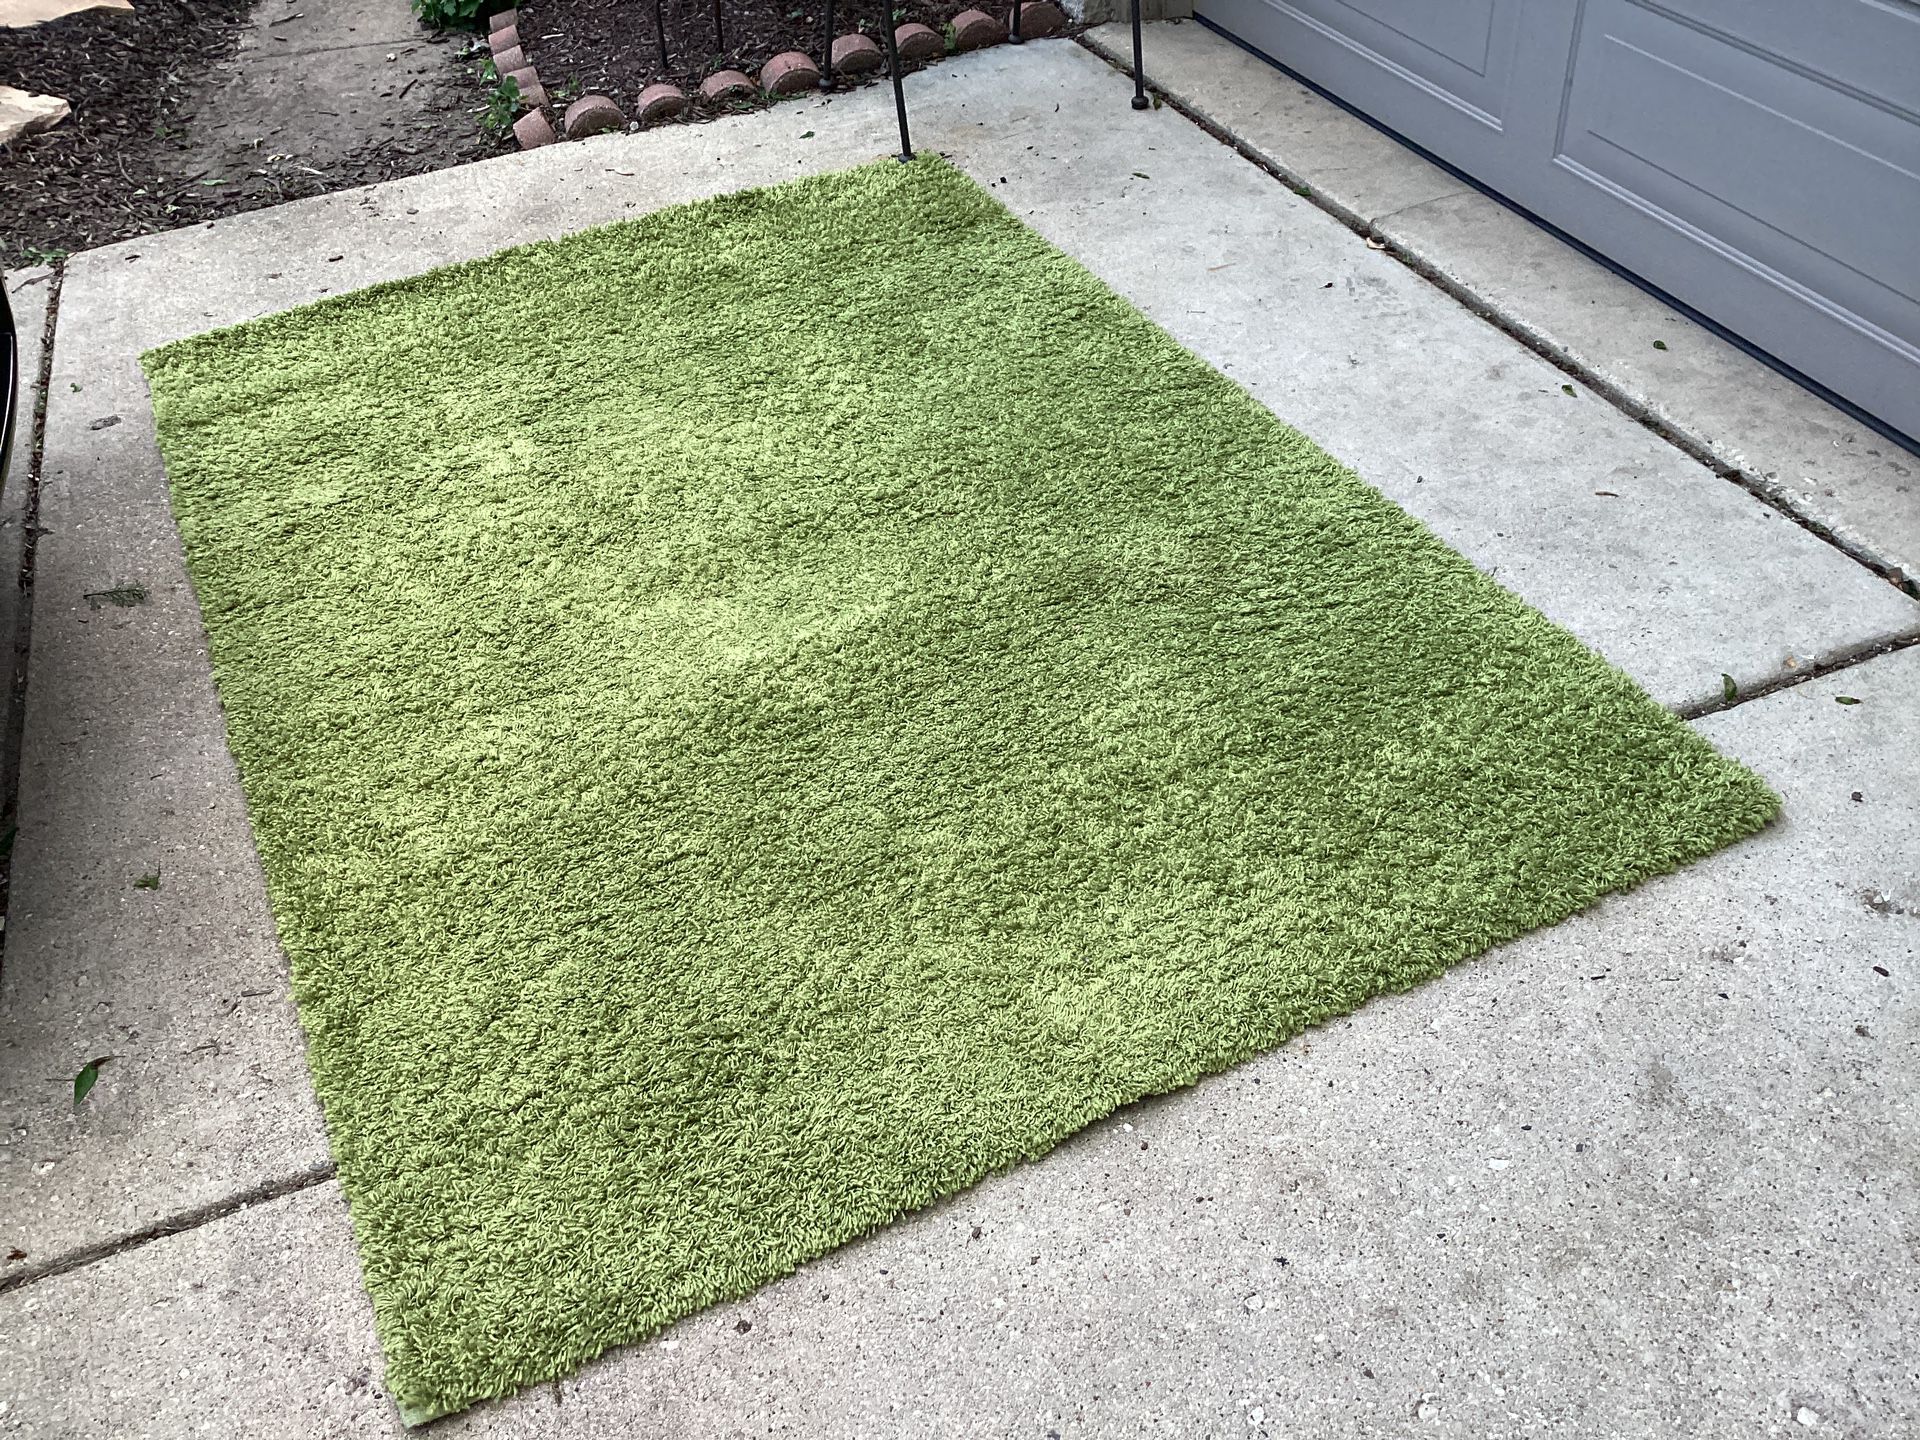 Shag Rug Excellent Condition  Used Little Green Can Use Anywhere Priced To Sell  Includes Picture Of Back Very Clean87long—-61 wide 